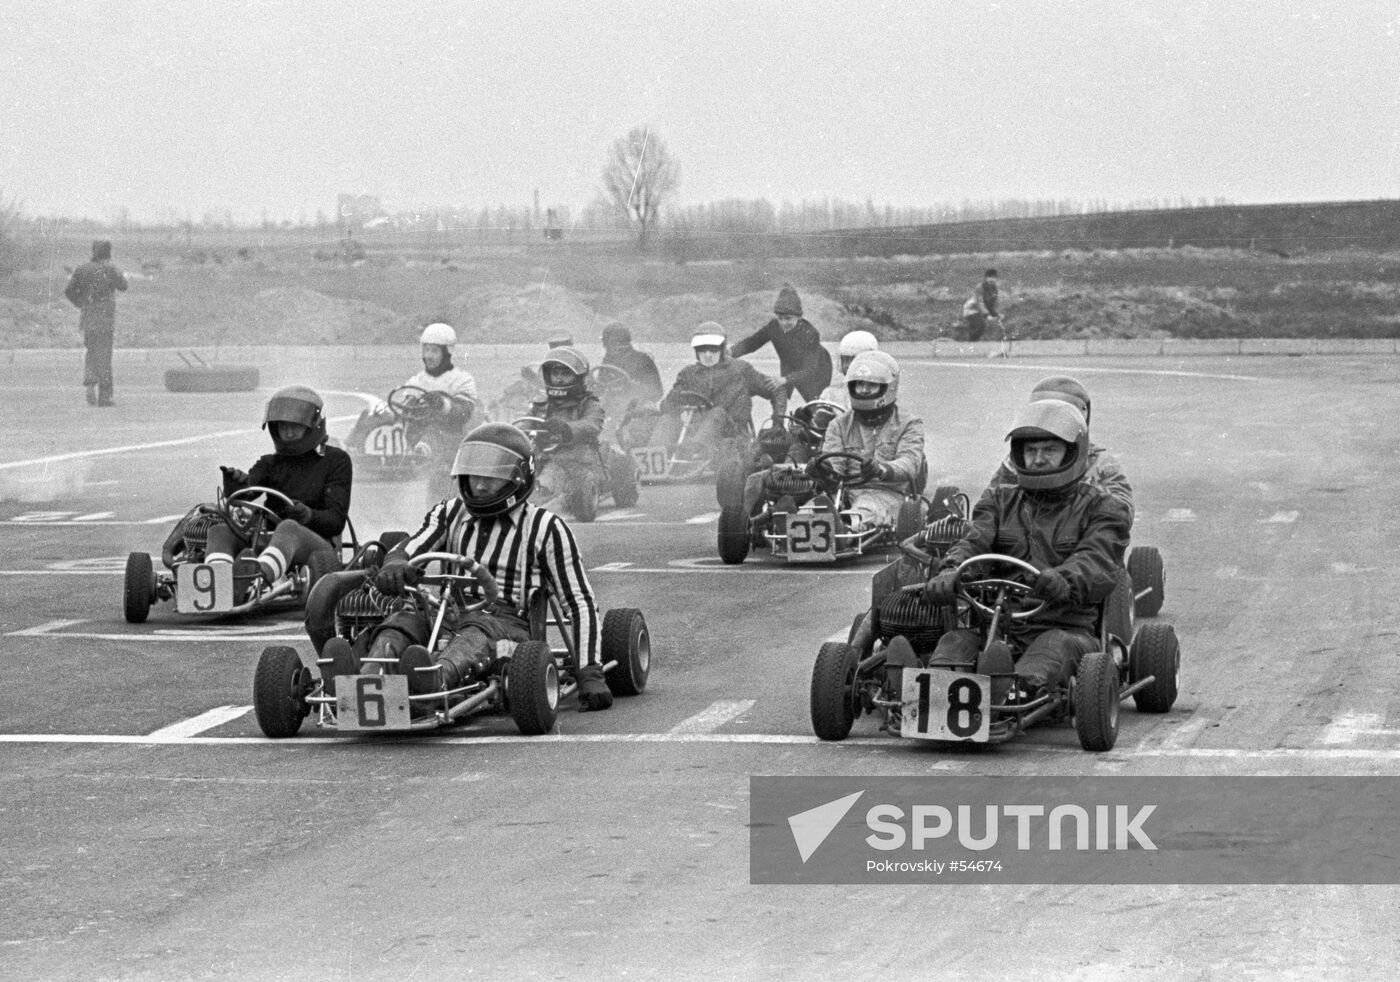 GO-KARTERS COMPETITIONS